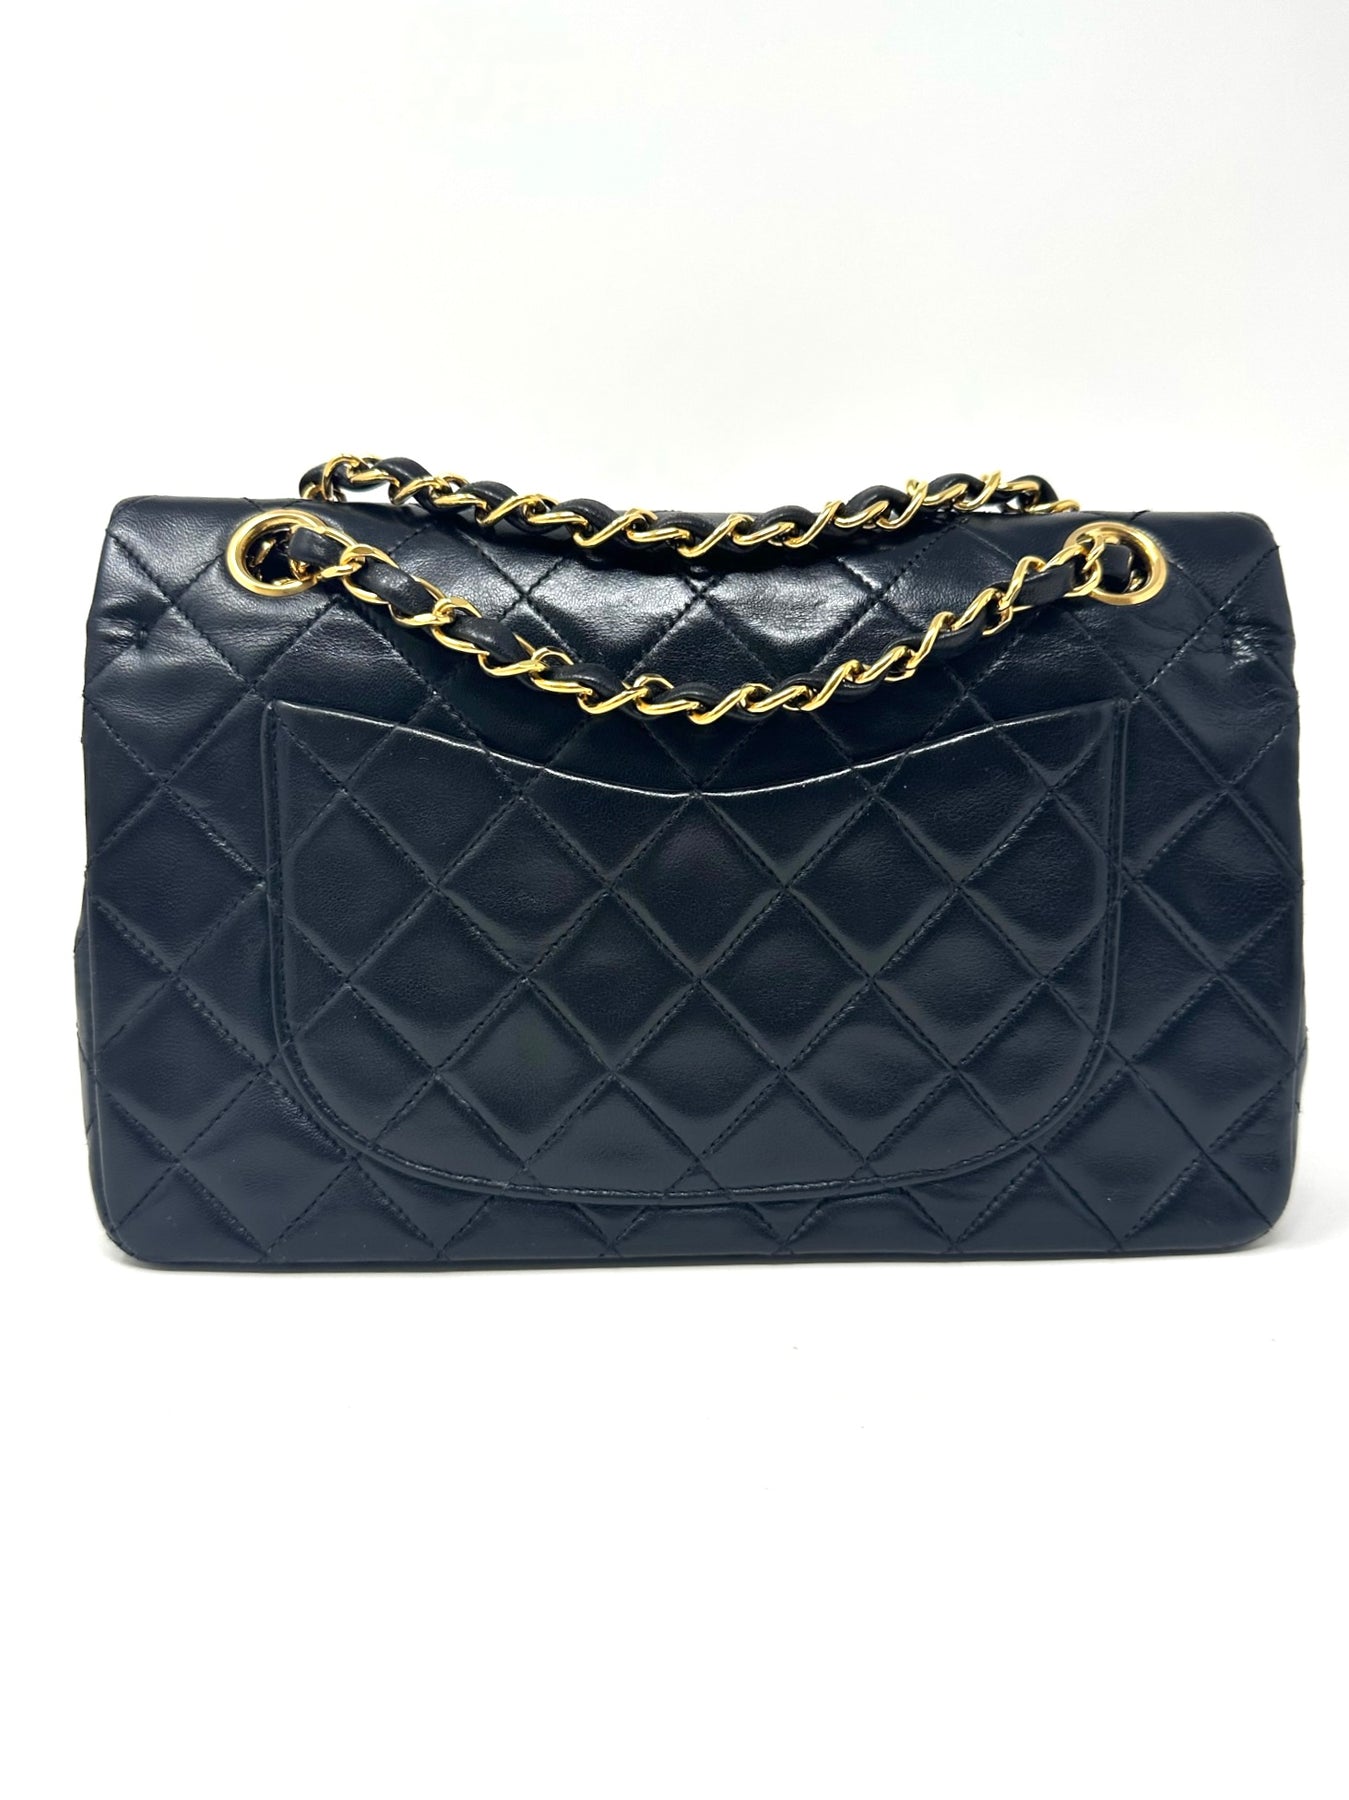 CHANEL Mini Flap Bag - More Than You Can Imagine